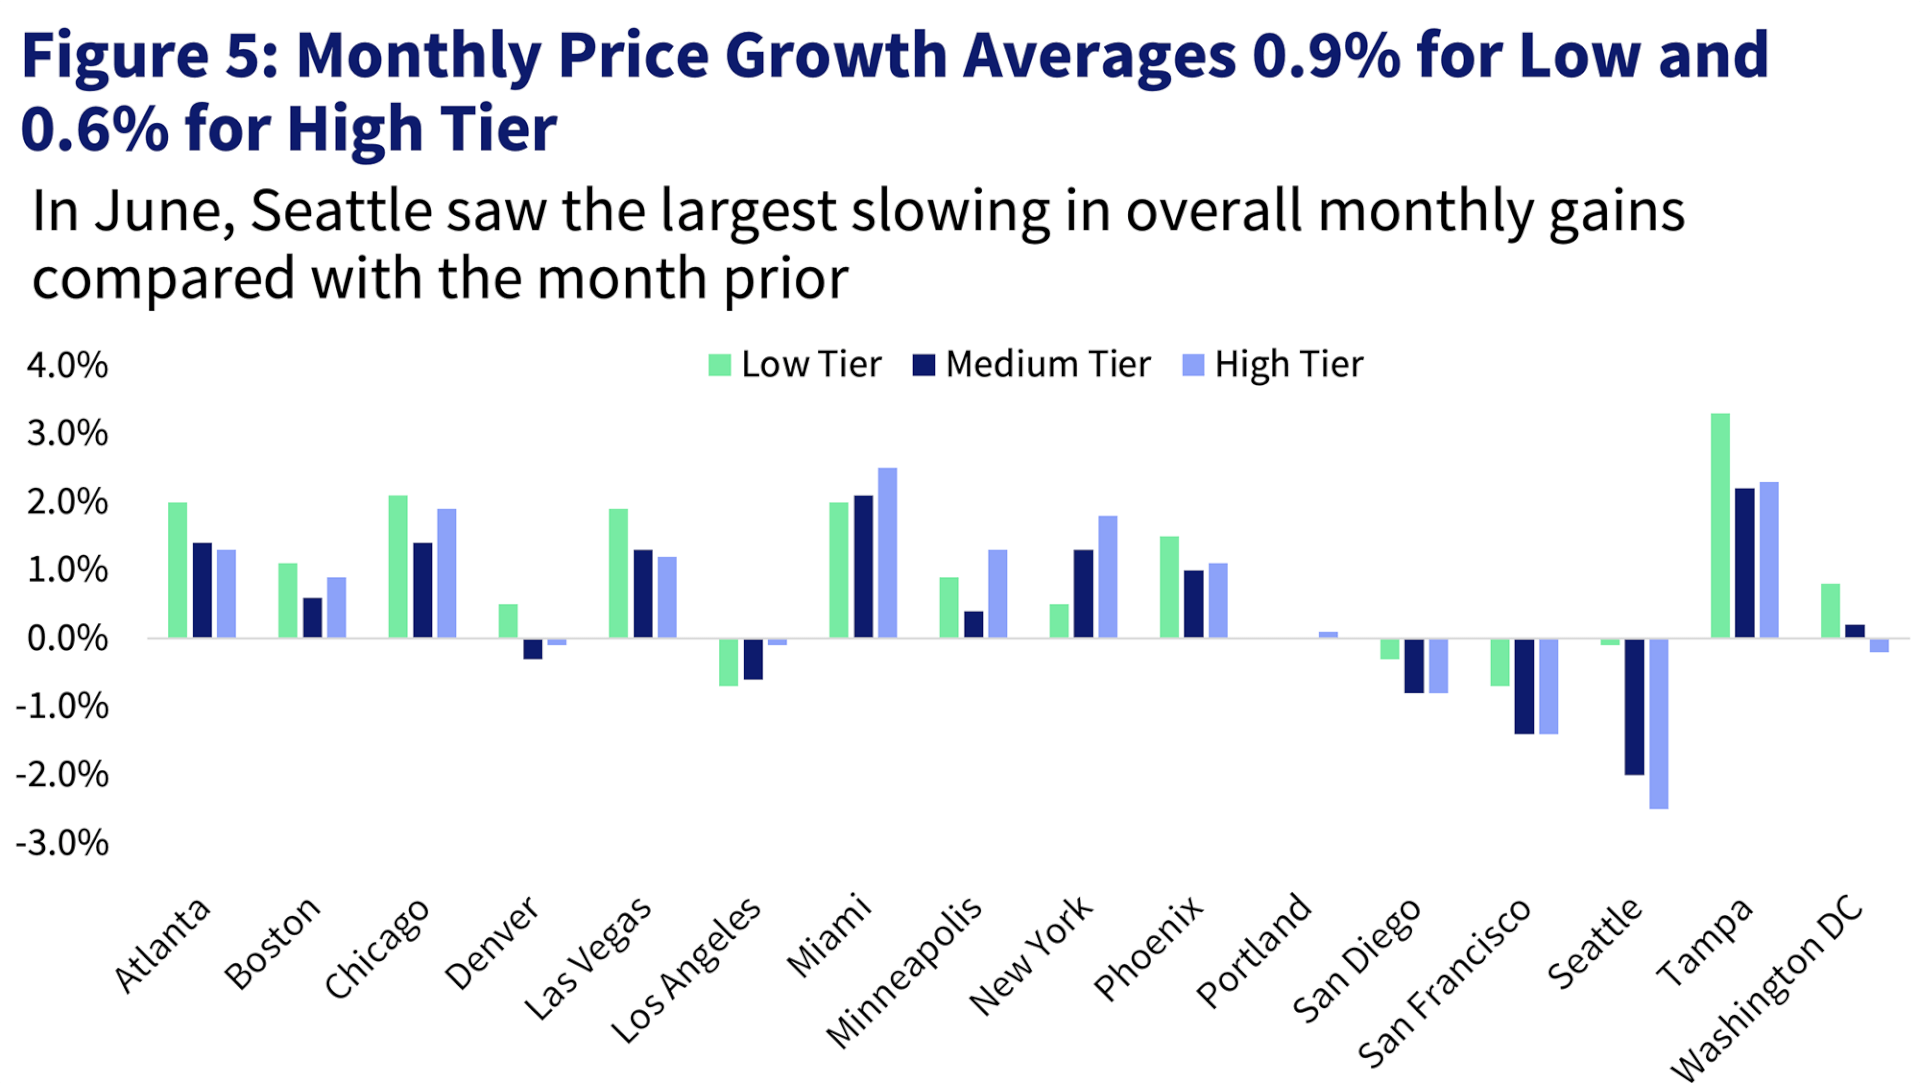 Figure 5: Monthly Price Declines Averages -0.1% for Low and -0.9% for High Tier